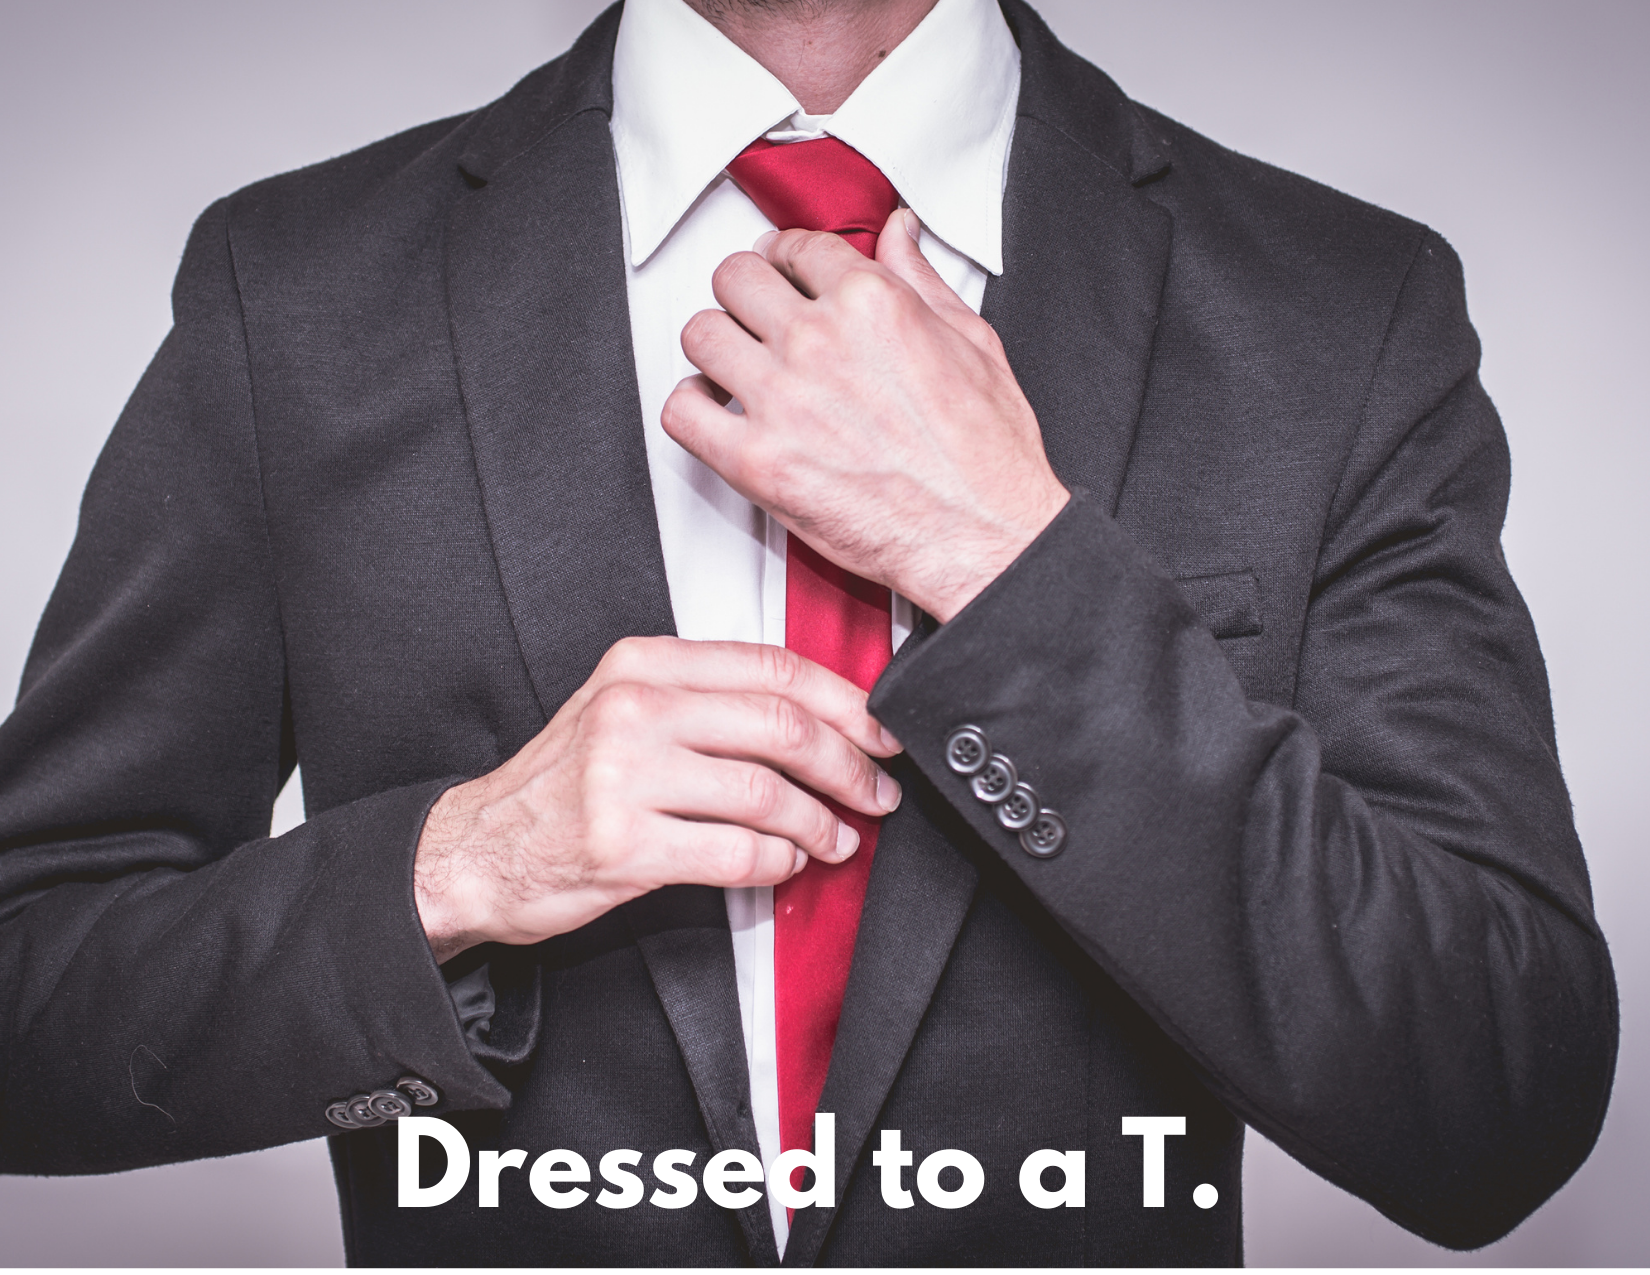 A picture of a well dressed man adjusting his tie with the caption "Dressed to a T"